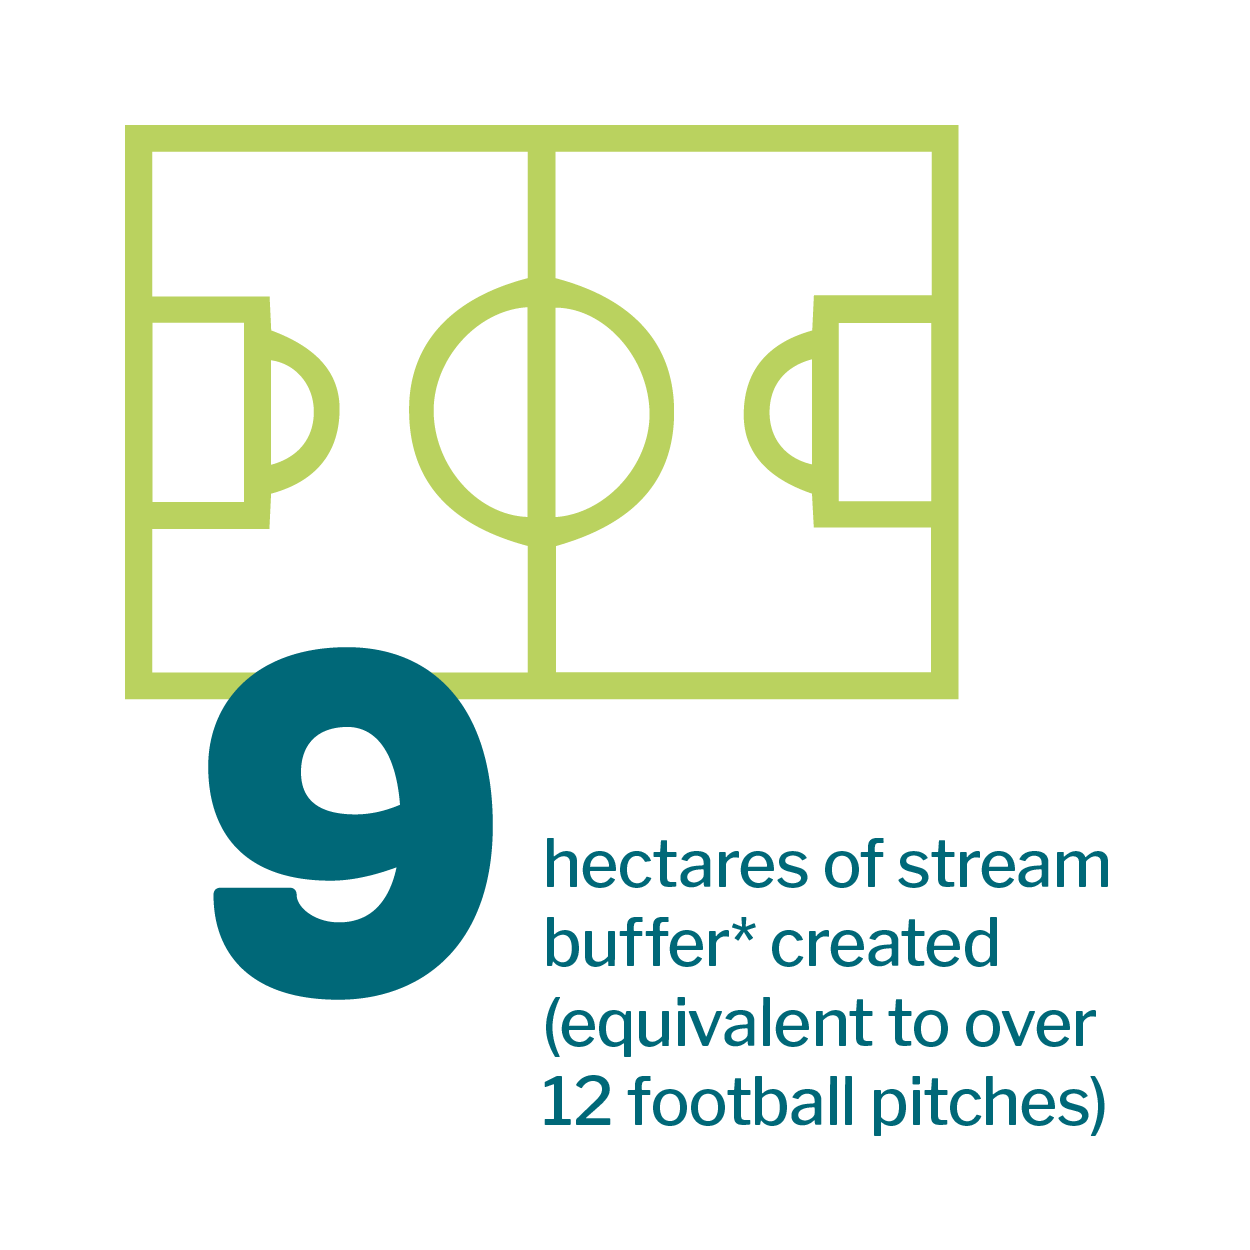 Football pitch icon that reads: 9 hectares of stream buffer* created, over 12 football pitches